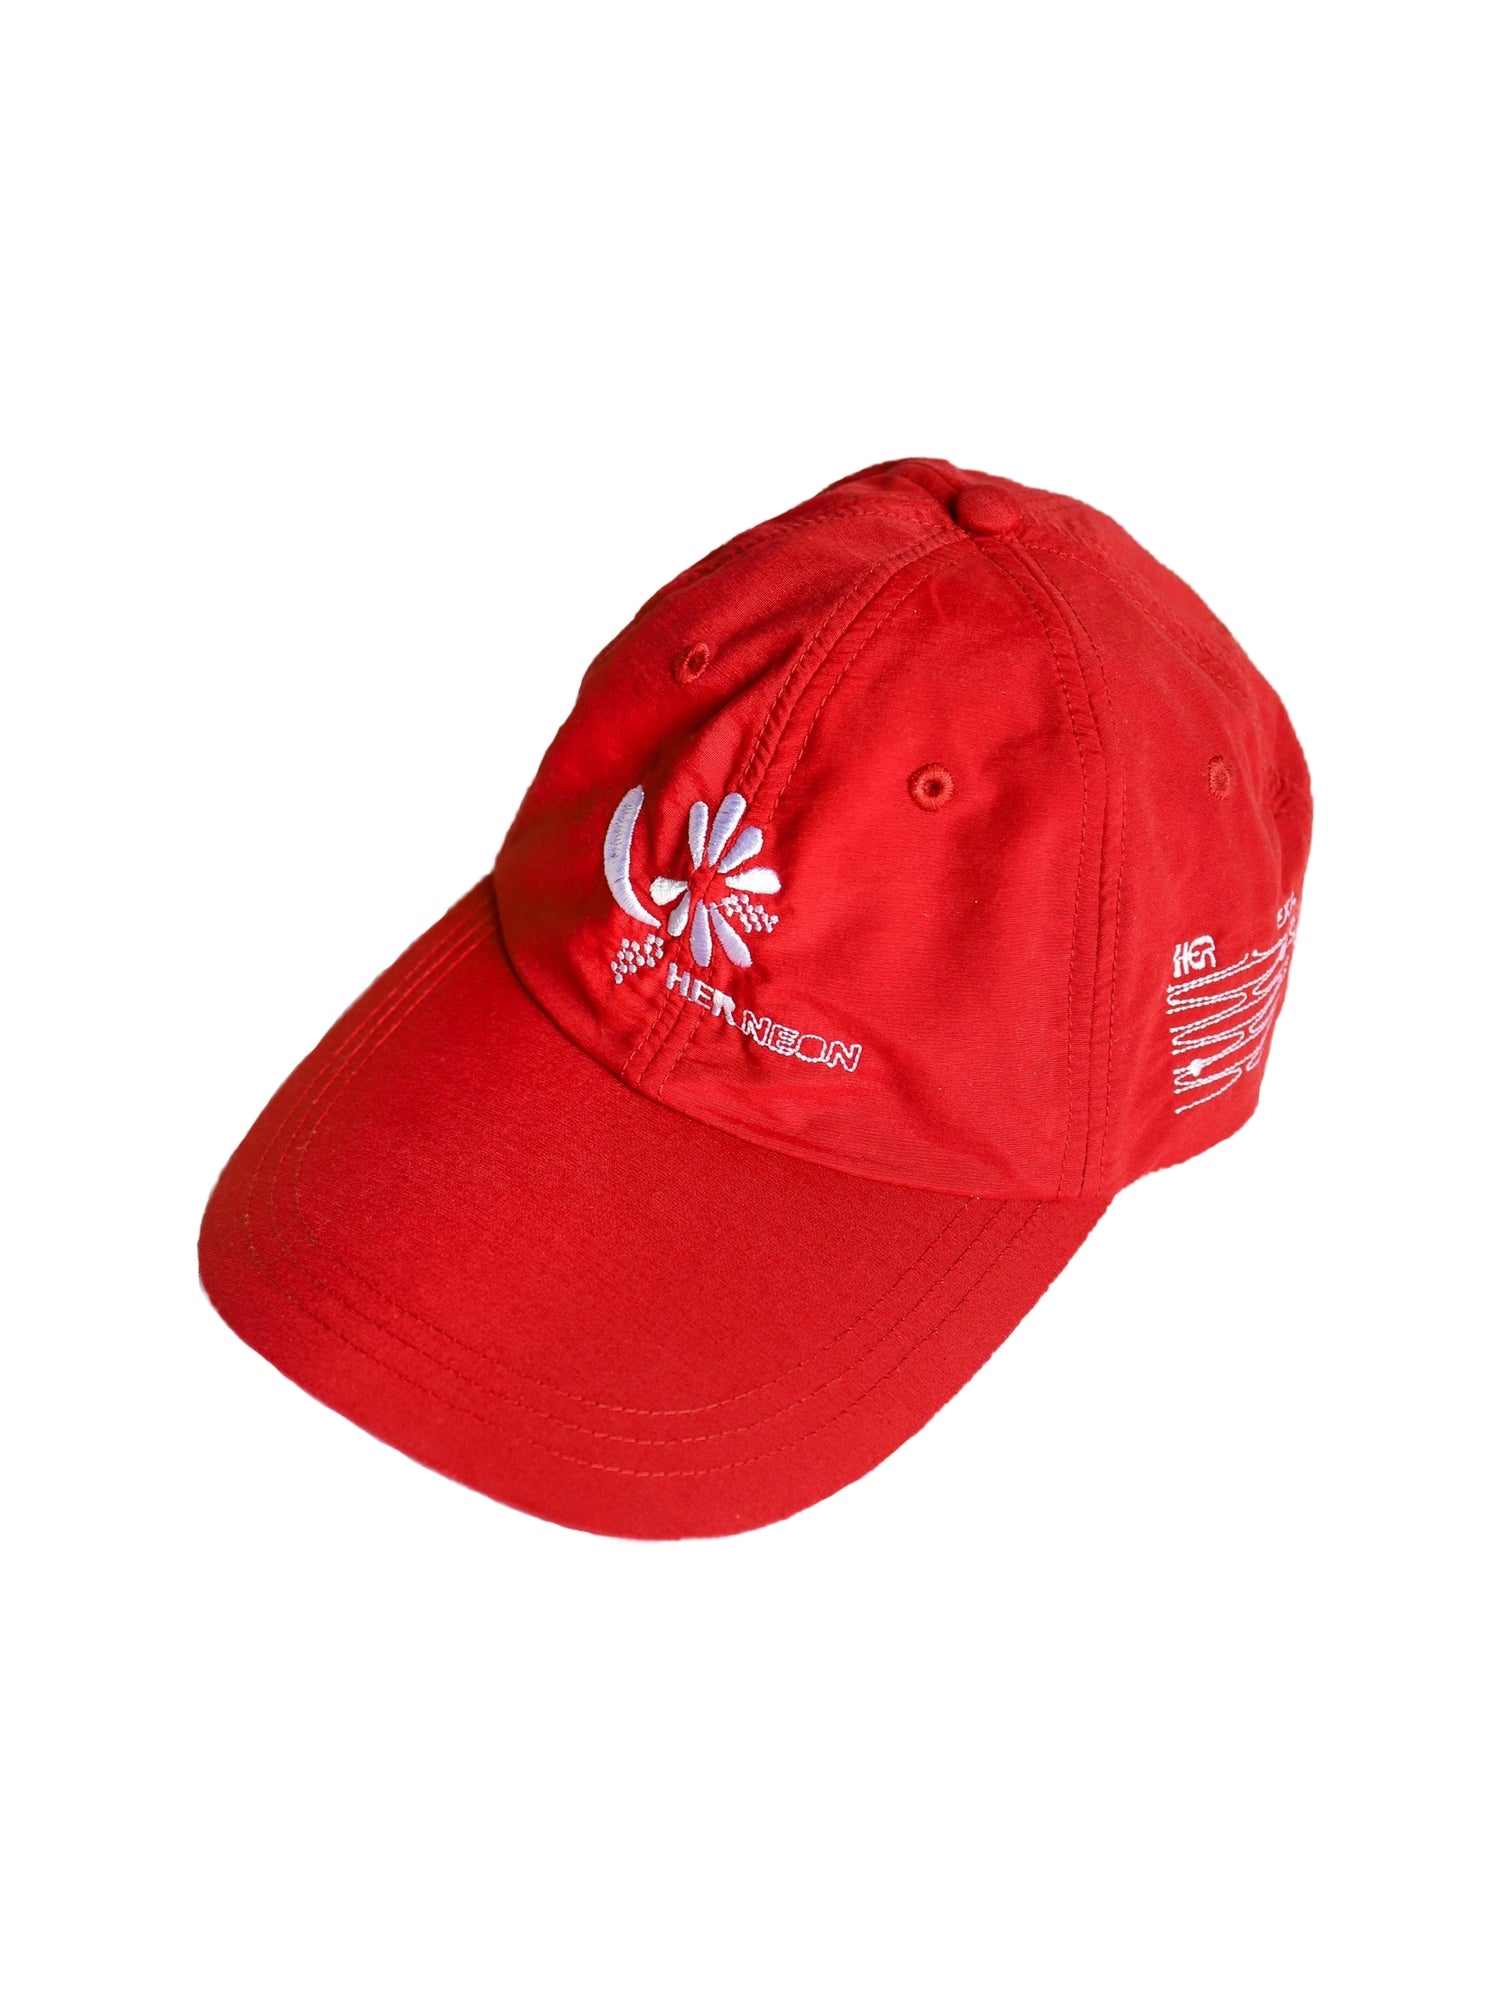 Bloom delivery cap / RED